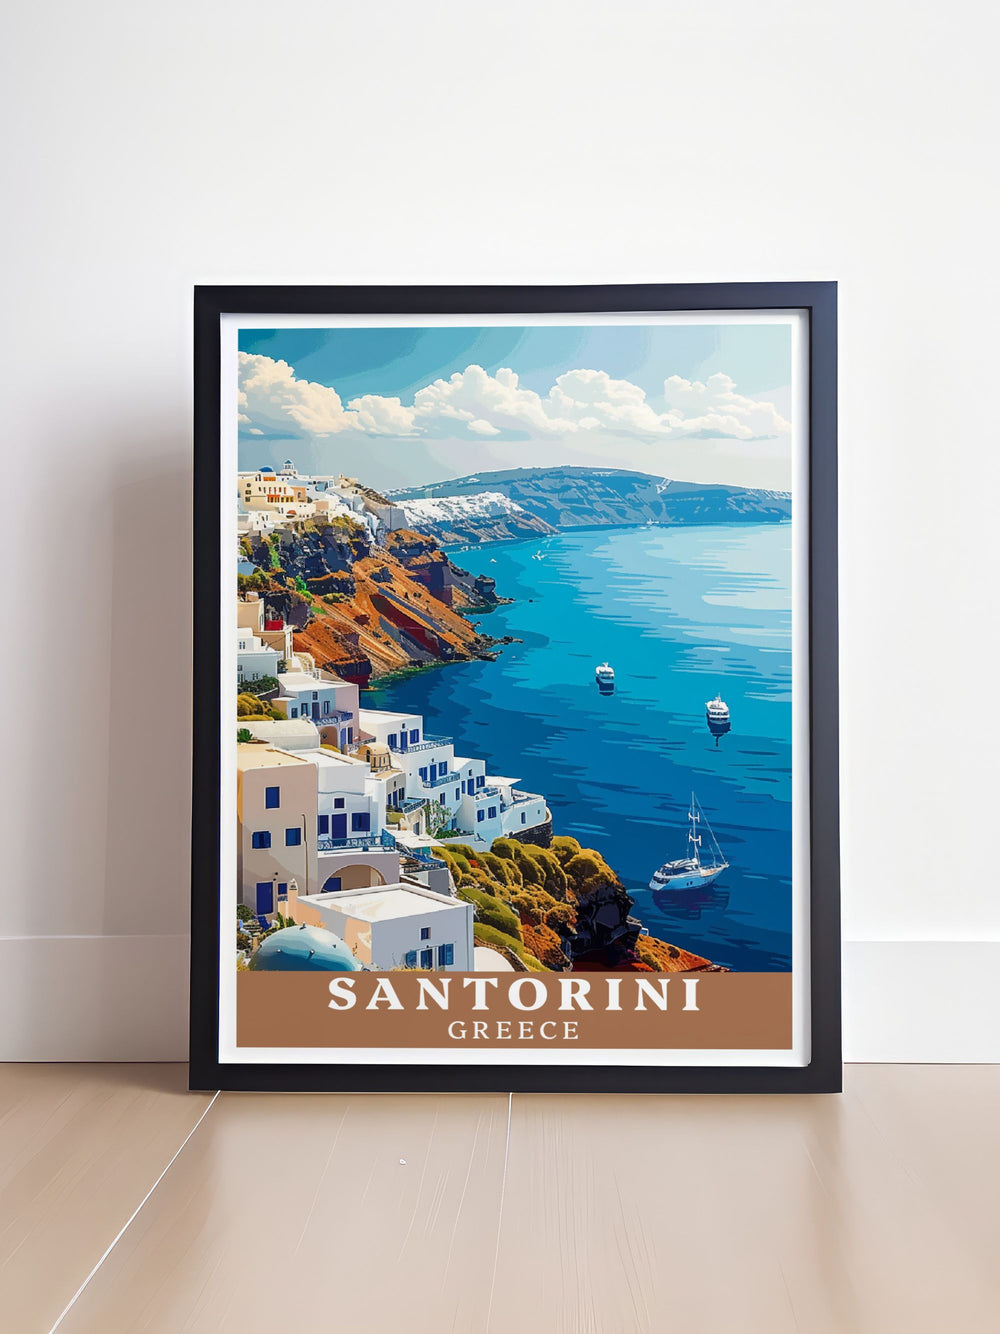 A stunning Santorini Art Print capturing the beauty of Fira, with its dramatic caldera views and whitewashed architecture. A perfect piece for adding Mediterranean elegance to your home.